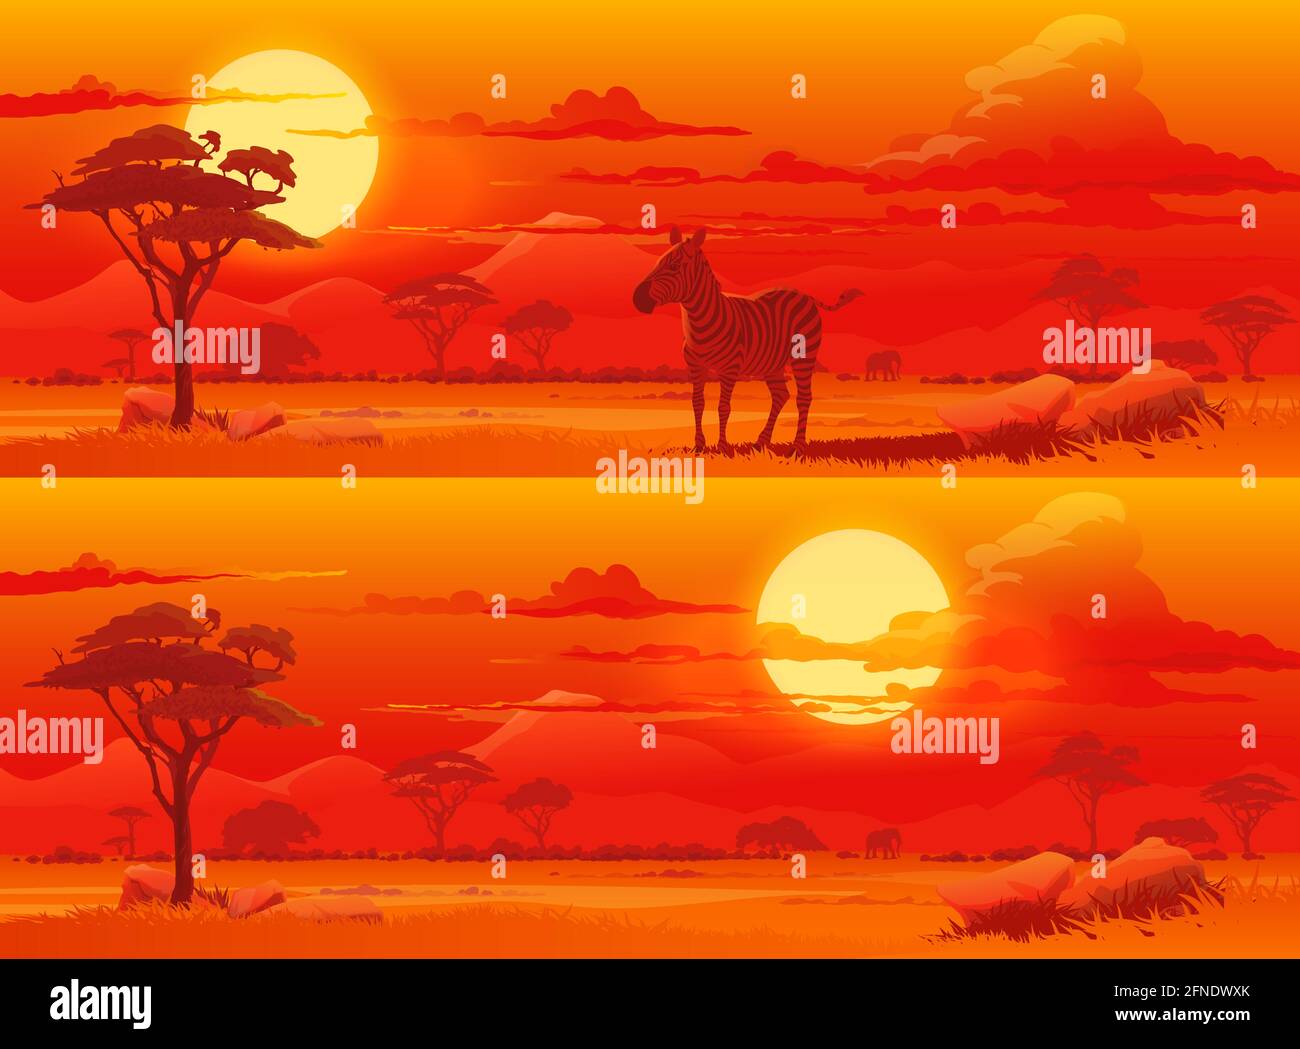 Sunset in african savannah cartoon vector background. Zebra and elephant, trees and grass, mountains peaks and setting sun disk. Africa nature, nation Stock Vector